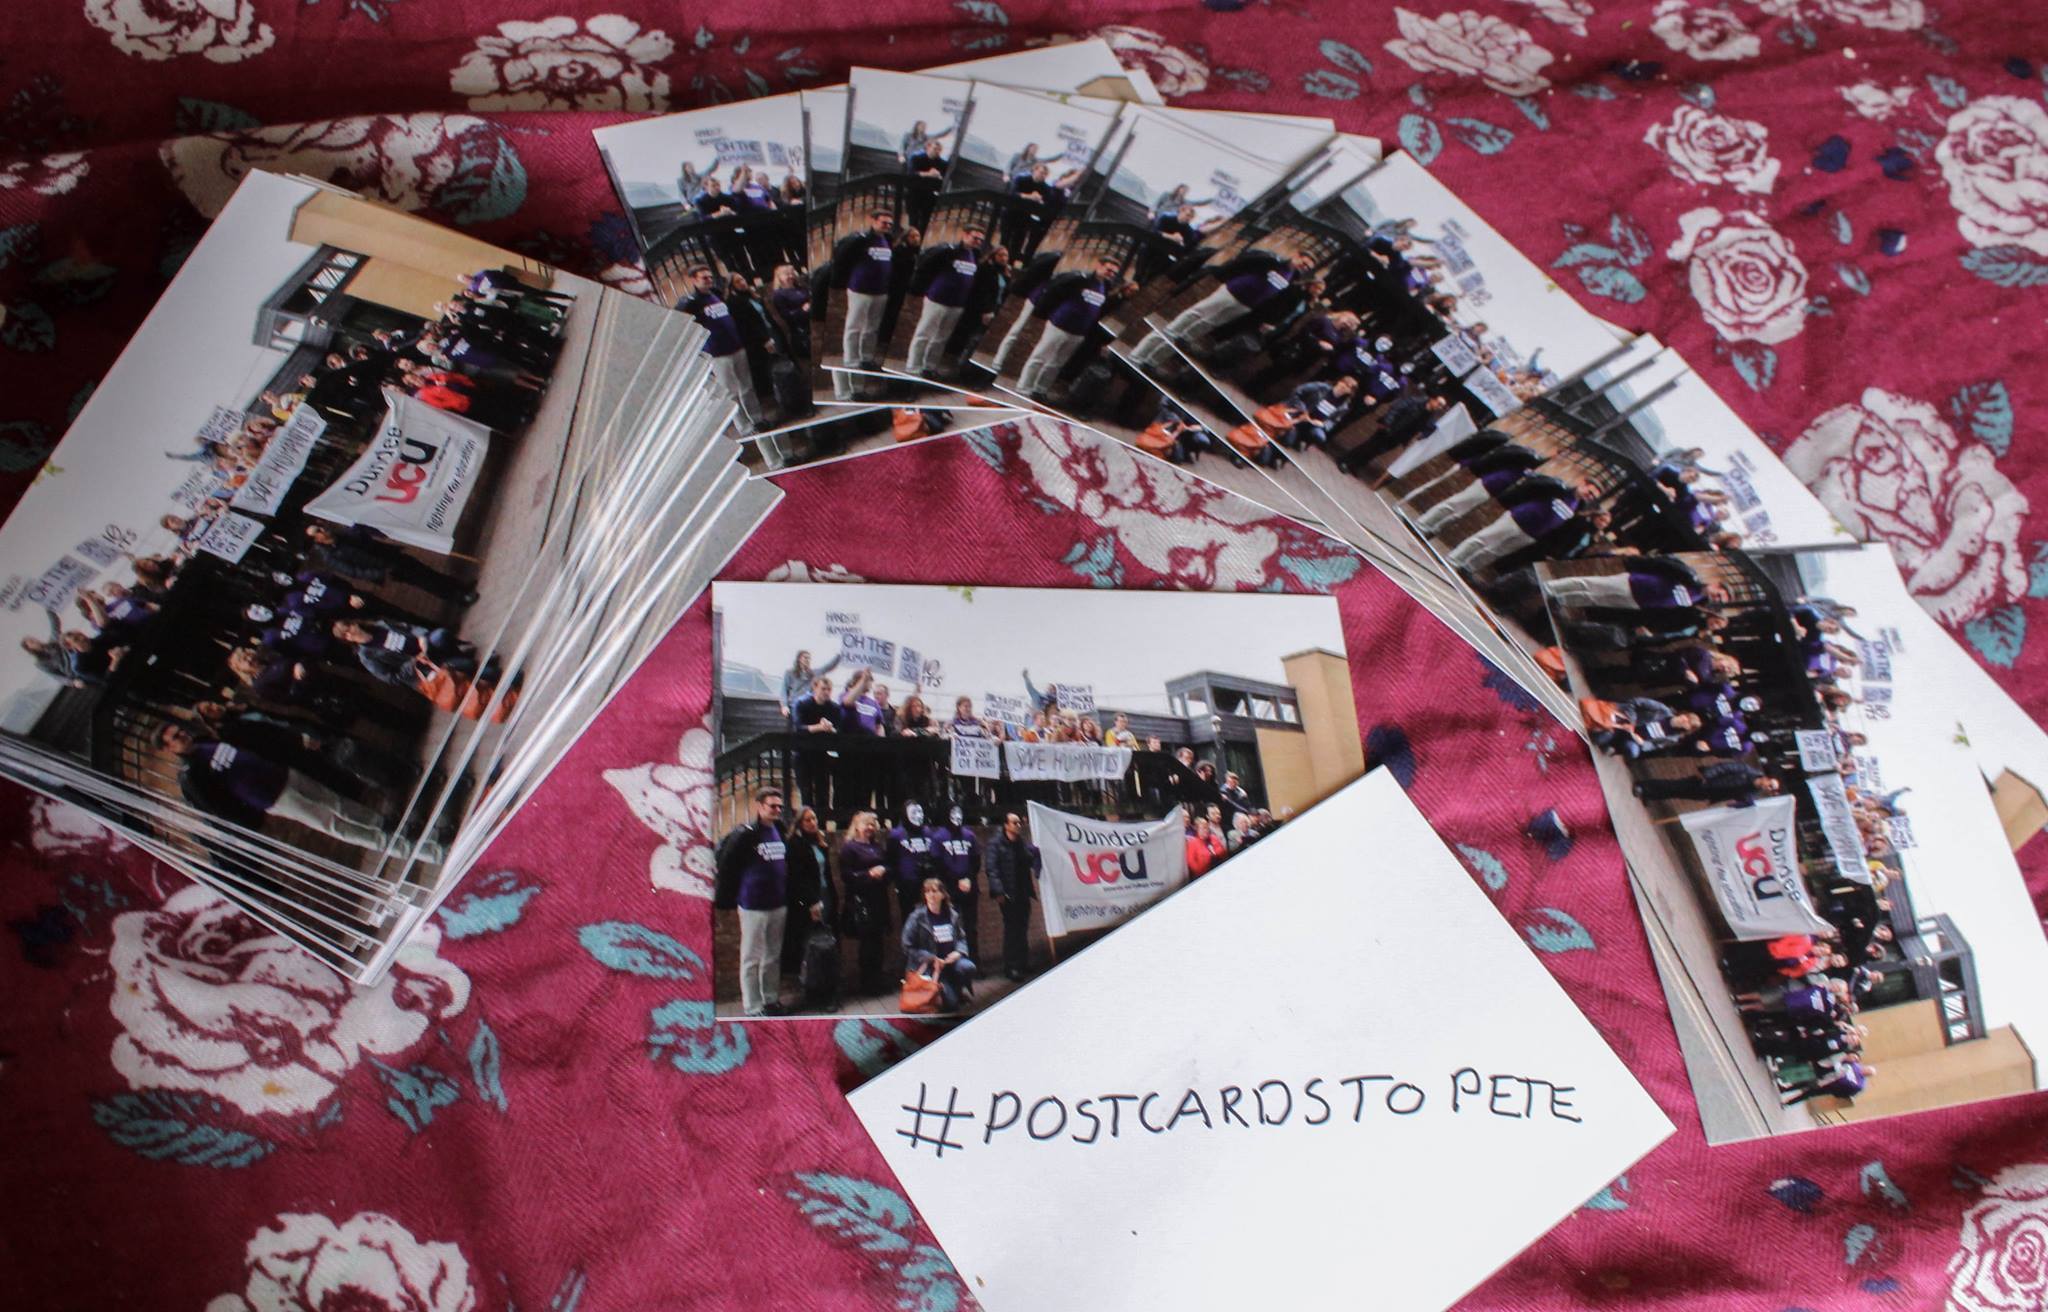 The postcards that were delivered to Dundee University principal Professor Sir Pete Downes.